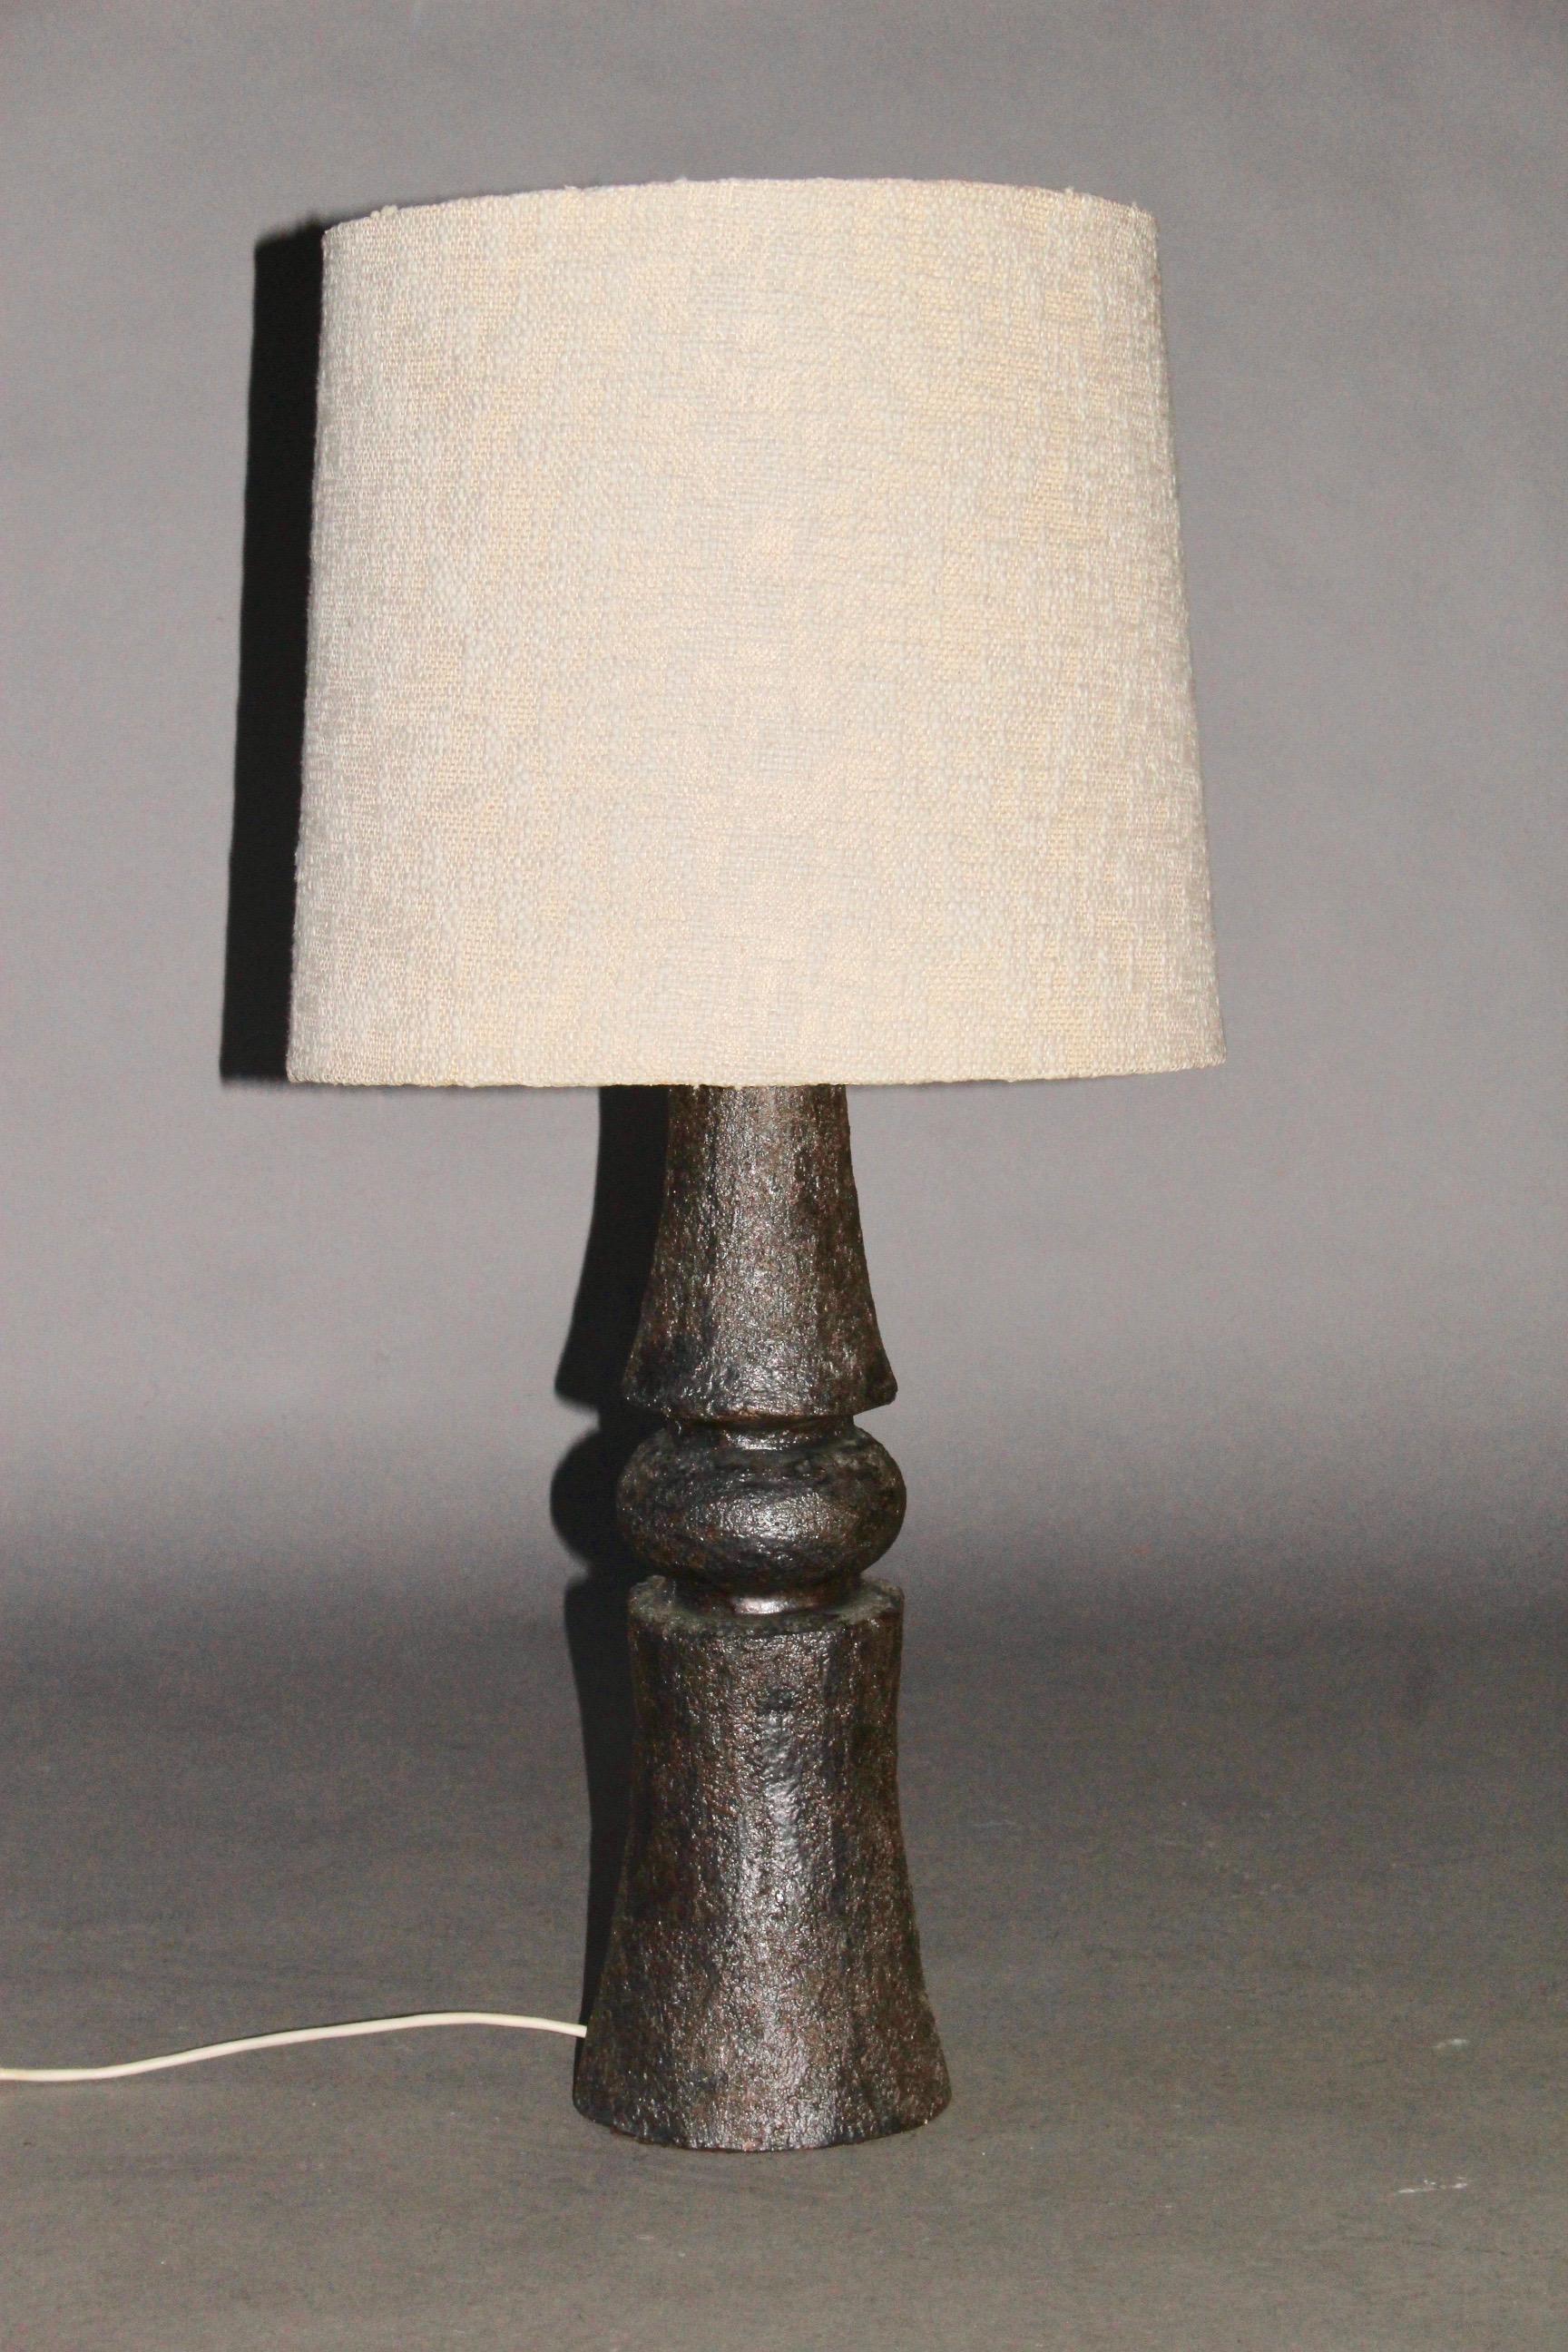 Black ceramic table lamp, dimensions without shade height 52, diameter 17 cm.